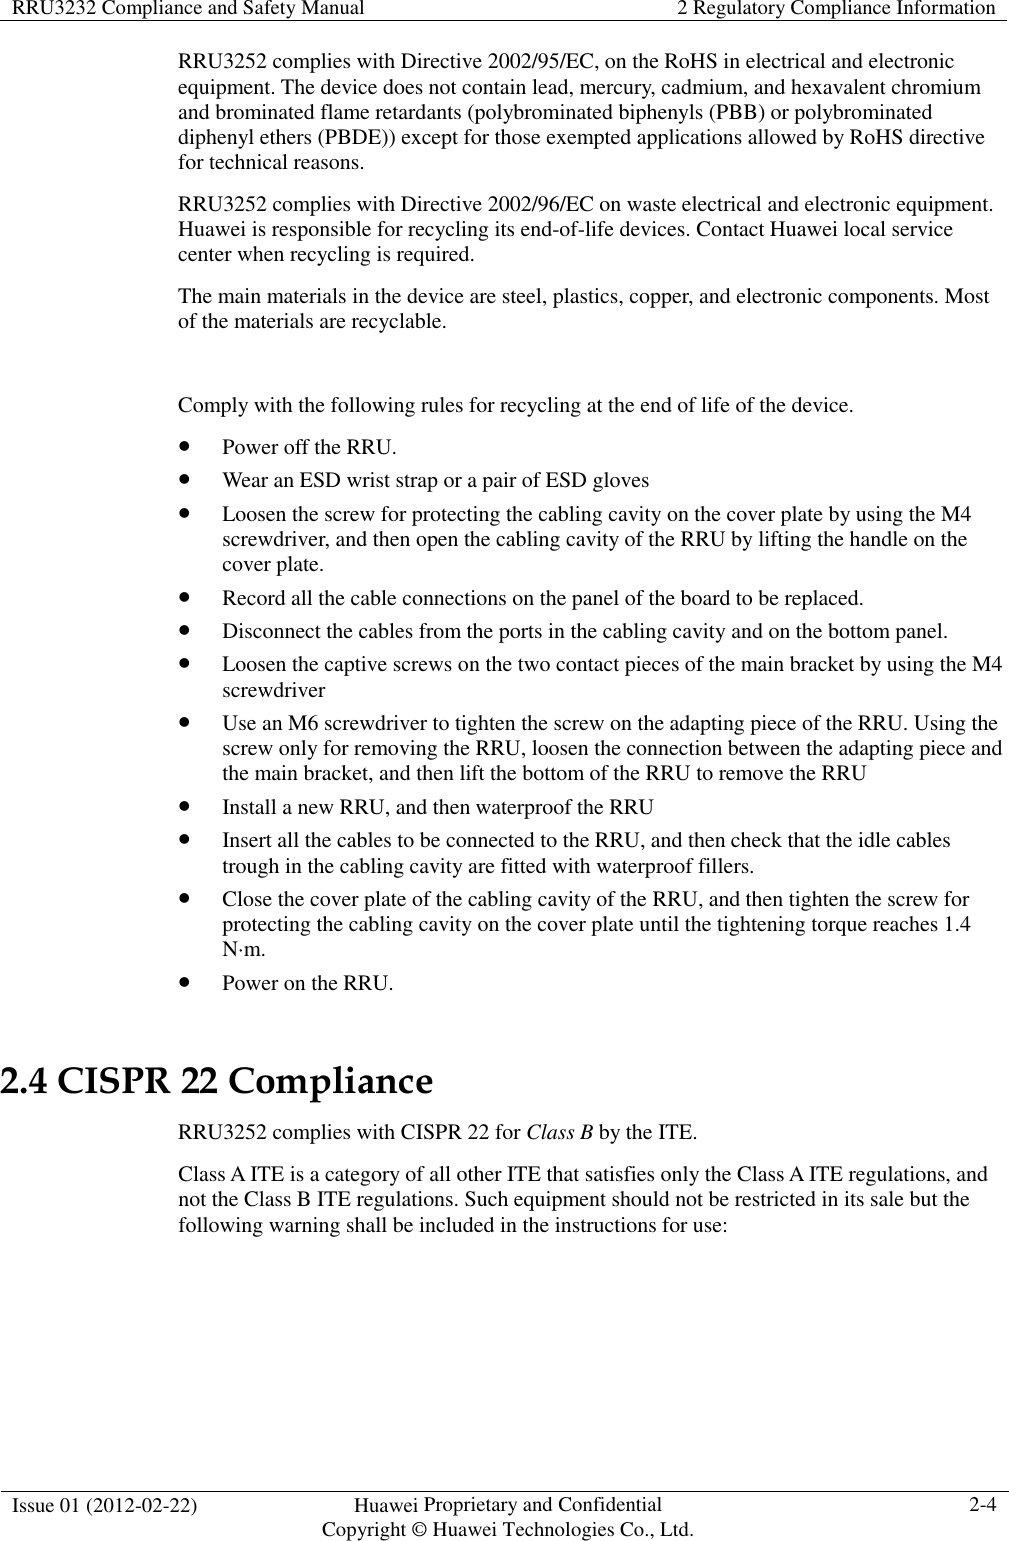 RRU3232 Compliance and Safety Manual  2 Regulatory Compliance Information  Issue 01 (2012-02-22)  Huawei Proprietary and Confidential           Copyright © Huawei Technologies Co., Ltd. 2-4  RRU3252 complies with Directive 2002/95/EC, on the RoHS in electrical and electronic equipment. The device does not contain lead, mercury, cadmium, and hexavalent chromium and brominated flame retardants (polybrominated biphenyls (PBB) or polybrominated diphenyl ethers (PBDE)) except for those exempted applications allowed by RoHS directive for technical reasons. RRU3252 complies with Directive 2002/96/EC on waste electrical and electronic equipment. Huawei is responsible for recycling its end-of-life devices. Contact Huawei local service center when recycling is required. The main materials in the device are steel, plastics, copper, and electronic components. Most of the materials are recyclable.  Comply with the following rules for recycling at the end of life of the device.  Power off the RRU.  Wear an ESD wrist strap or a pair of ESD gloves  Loosen the screw for protecting the cabling cavity on the cover plate by using the M4 screwdriver, and then open the cabling cavity of the RRU by lifting the handle on the cover plate.  Record all the cable connections on the panel of the board to be replaced.  Disconnect the cables from the ports in the cabling cavity and on the bottom panel.  Loosen the captive screws on the two contact pieces of the main bracket by using the M4 screwdriver  Use an M6 screwdriver to tighten the screw on the adapting piece of the RRU. Using the screw only for removing the RRU, loosen the connection between the adapting piece and the main bracket, and then lift the bottom of the RRU to remove the RRU  Install a new RRU, and then waterproof the RRU  Insert all the cables to be connected to the RRU, and then check that the idle cables trough in the cabling cavity are fitted with waterproof fillers.  Close the cover plate of the cabling cavity of the RRU, and then tighten the screw for protecting the cabling cavity on the cover plate until the tightening torque reaches 1.4 N·m.  Power on the RRU. 2.4 CISPR 22 Compliance RRU3252 complies with CISPR 22 for Class B by the ITE.   Class A ITE is a category of all other ITE that satisfies only the Class A ITE regulations, and not the Class B ITE regulations. Such equipment should not be restricted in its sale but the following warning shall be included in the instructions for use:  